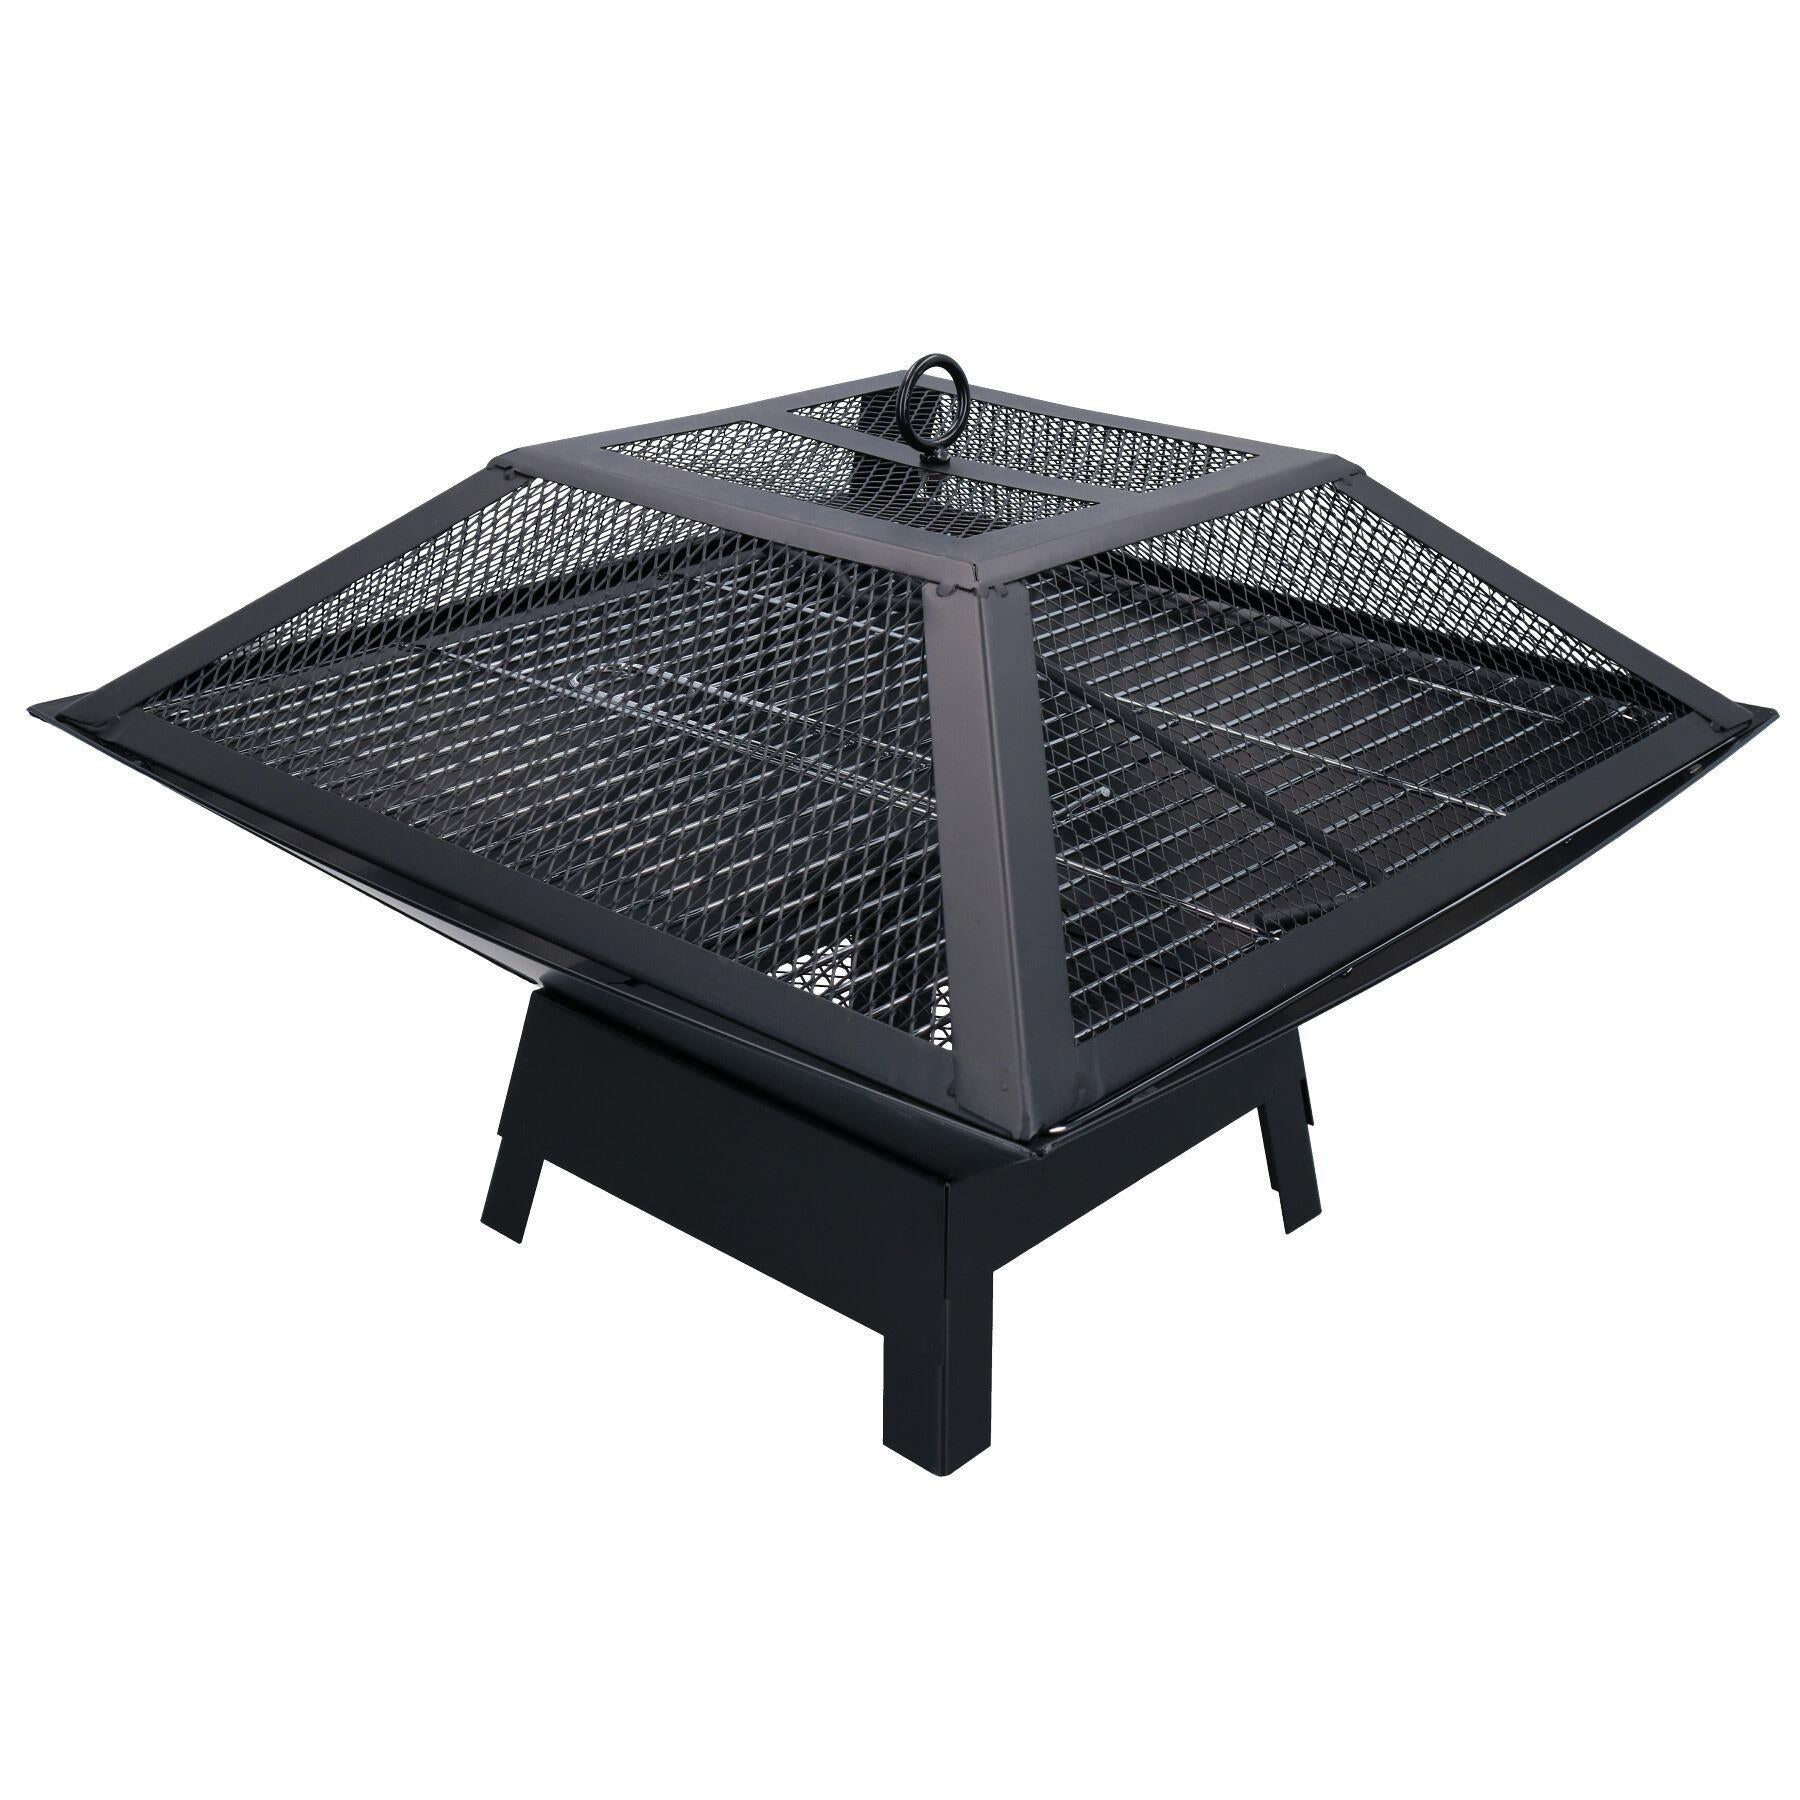 Outdoor Metal Garden Fire Pit Basket With BBQ Barbecue Grill + Safety Mesh